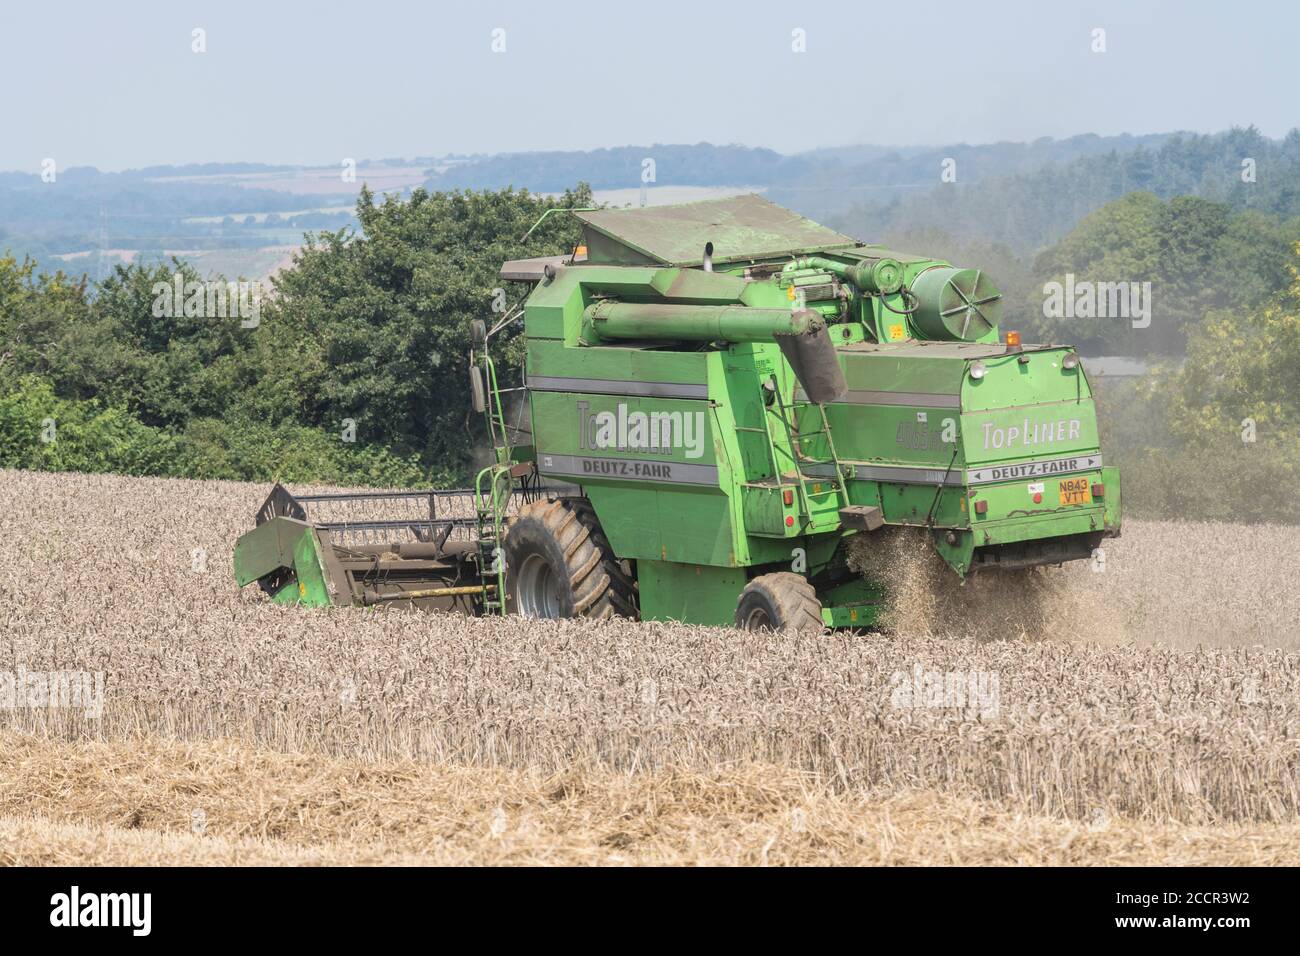 Deutz-Fahr 4065 combine harvester cutting 2020 UK wheat crop on hot summer day & filling air with dust. Tine reel, side-pipe and straw walker visible. Stock Photo